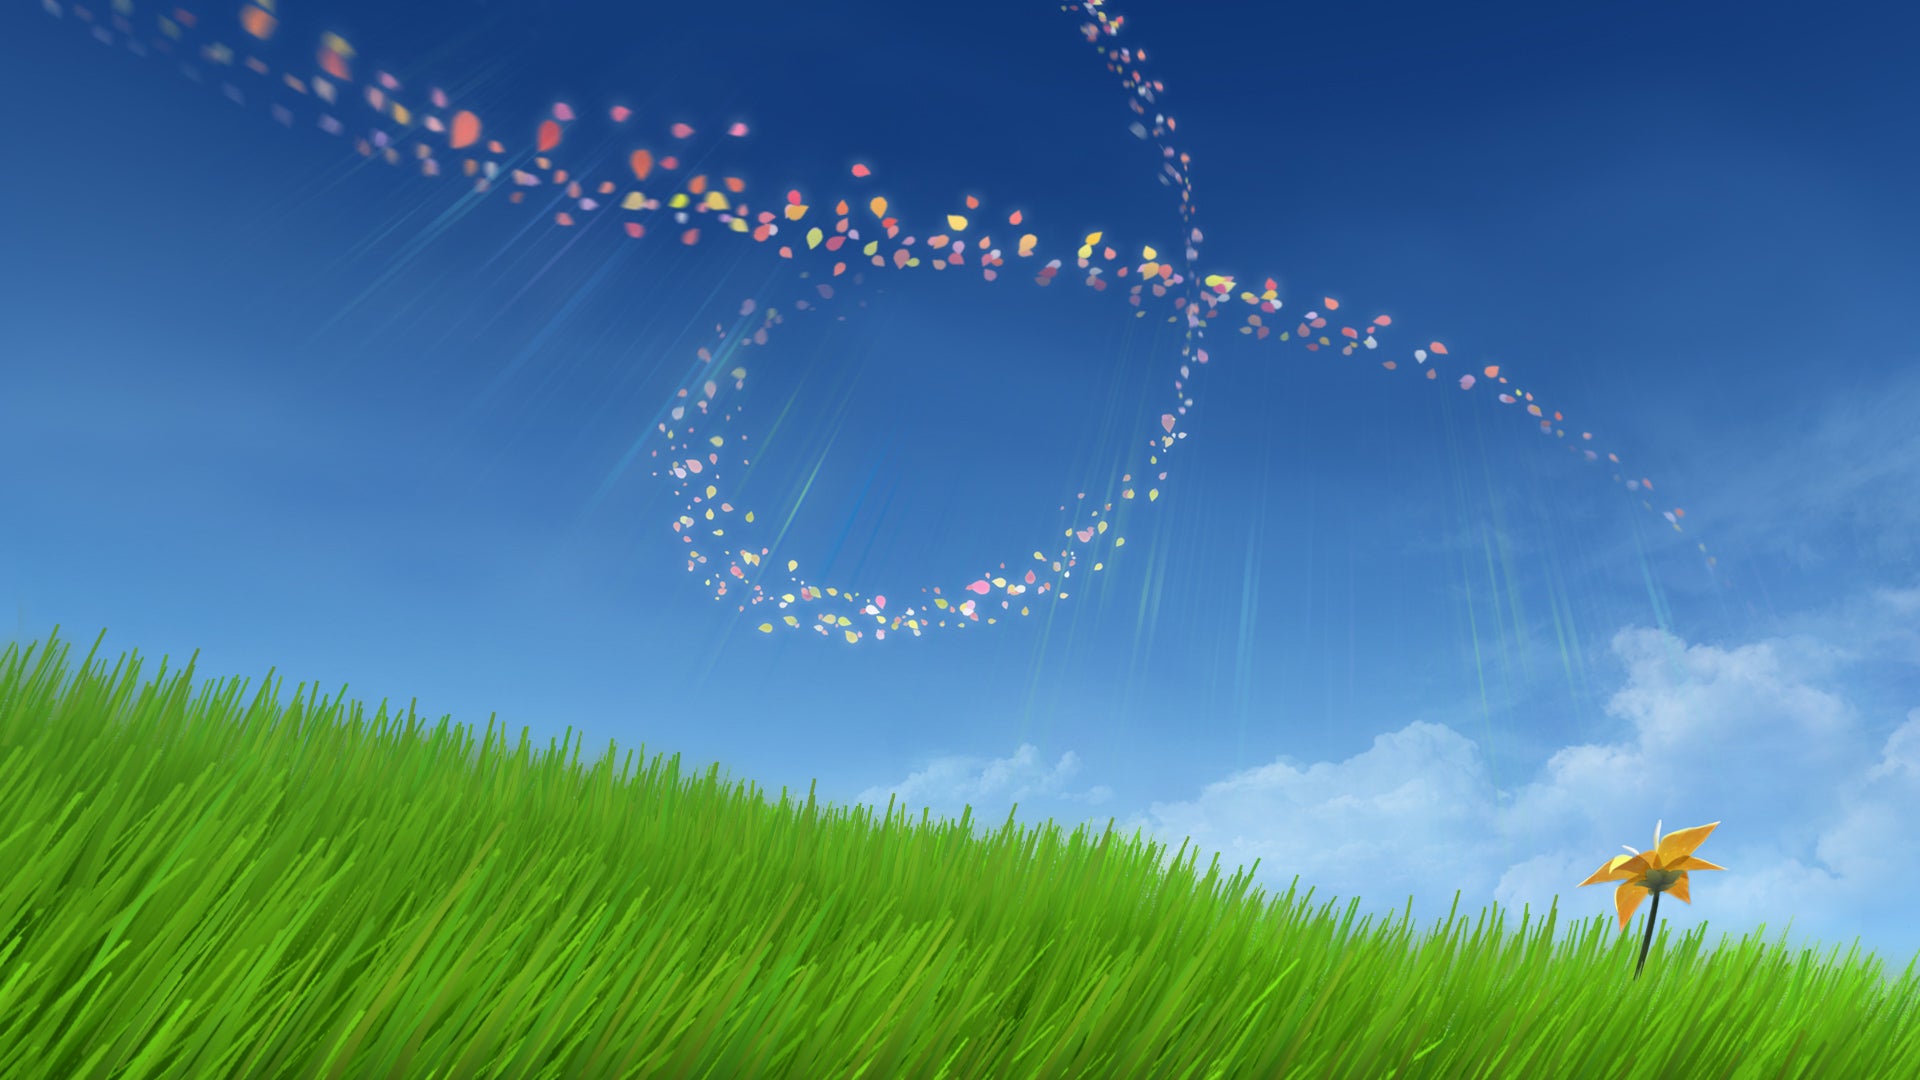 A key art image from Flower, showing a blue sky